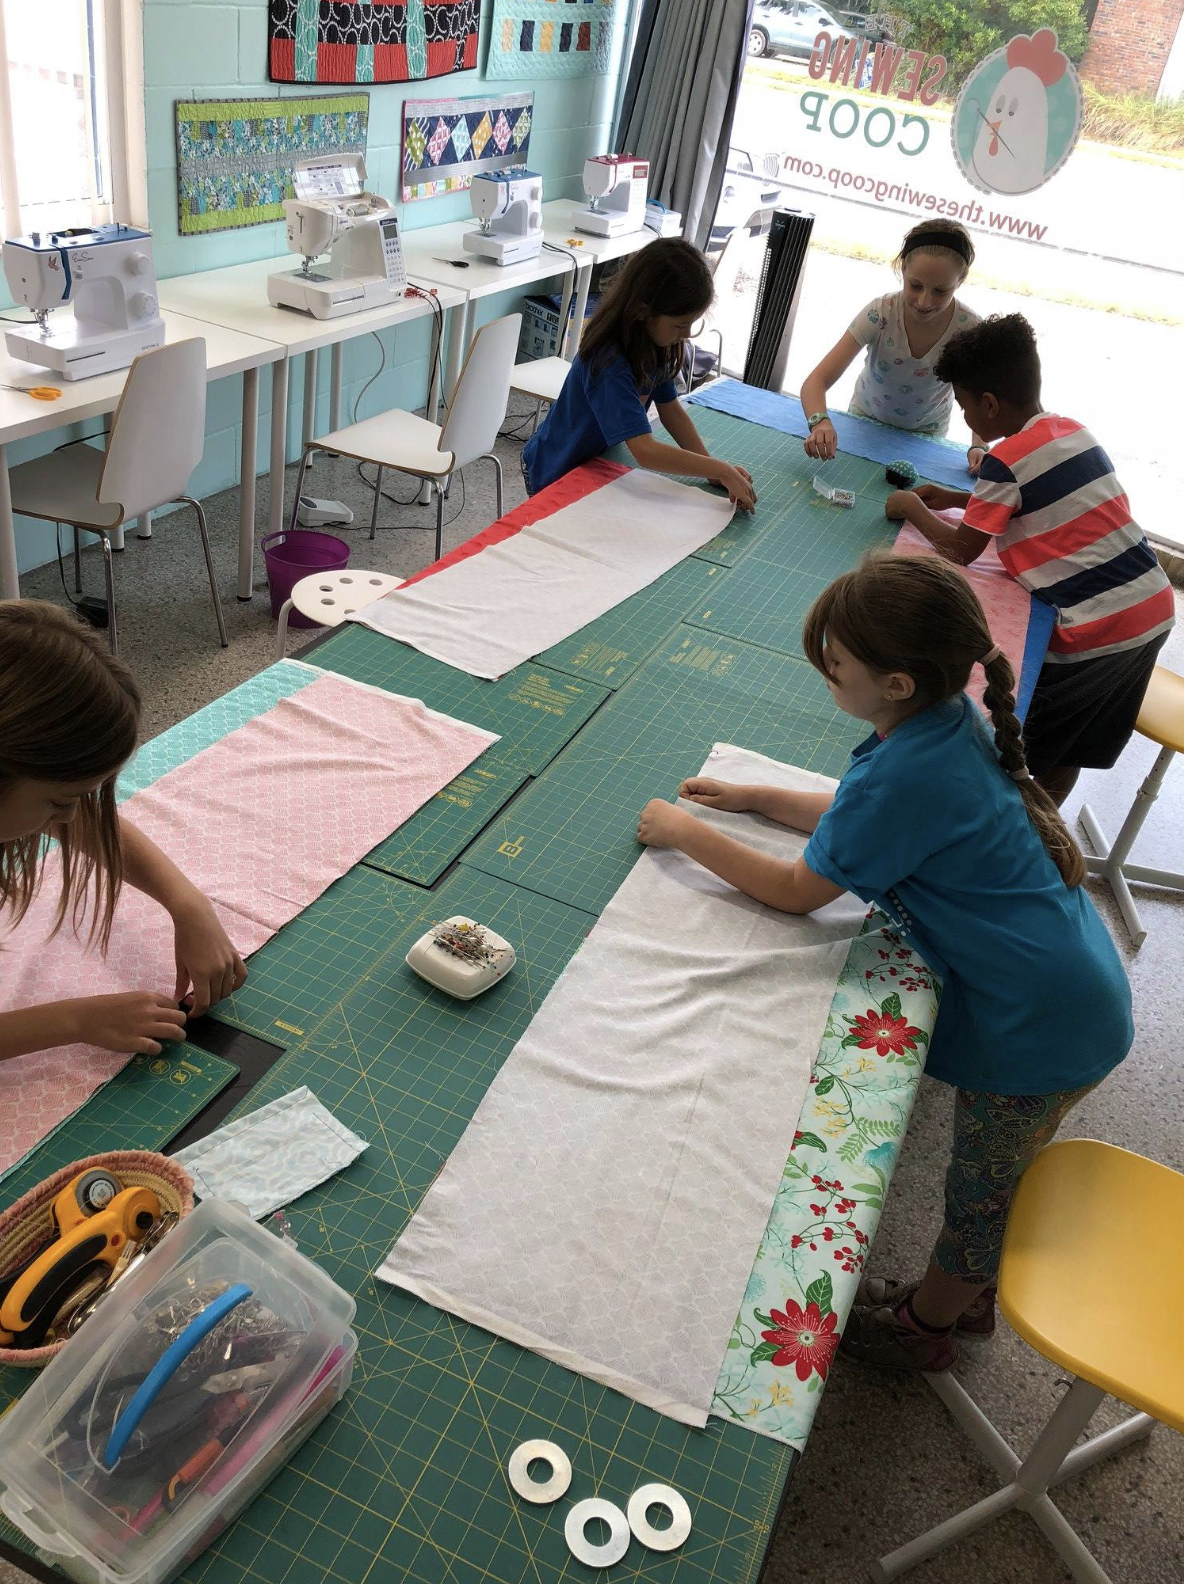 Kids Sewing Camp- Friday, June 7th: 9:00am- 2:00pm 